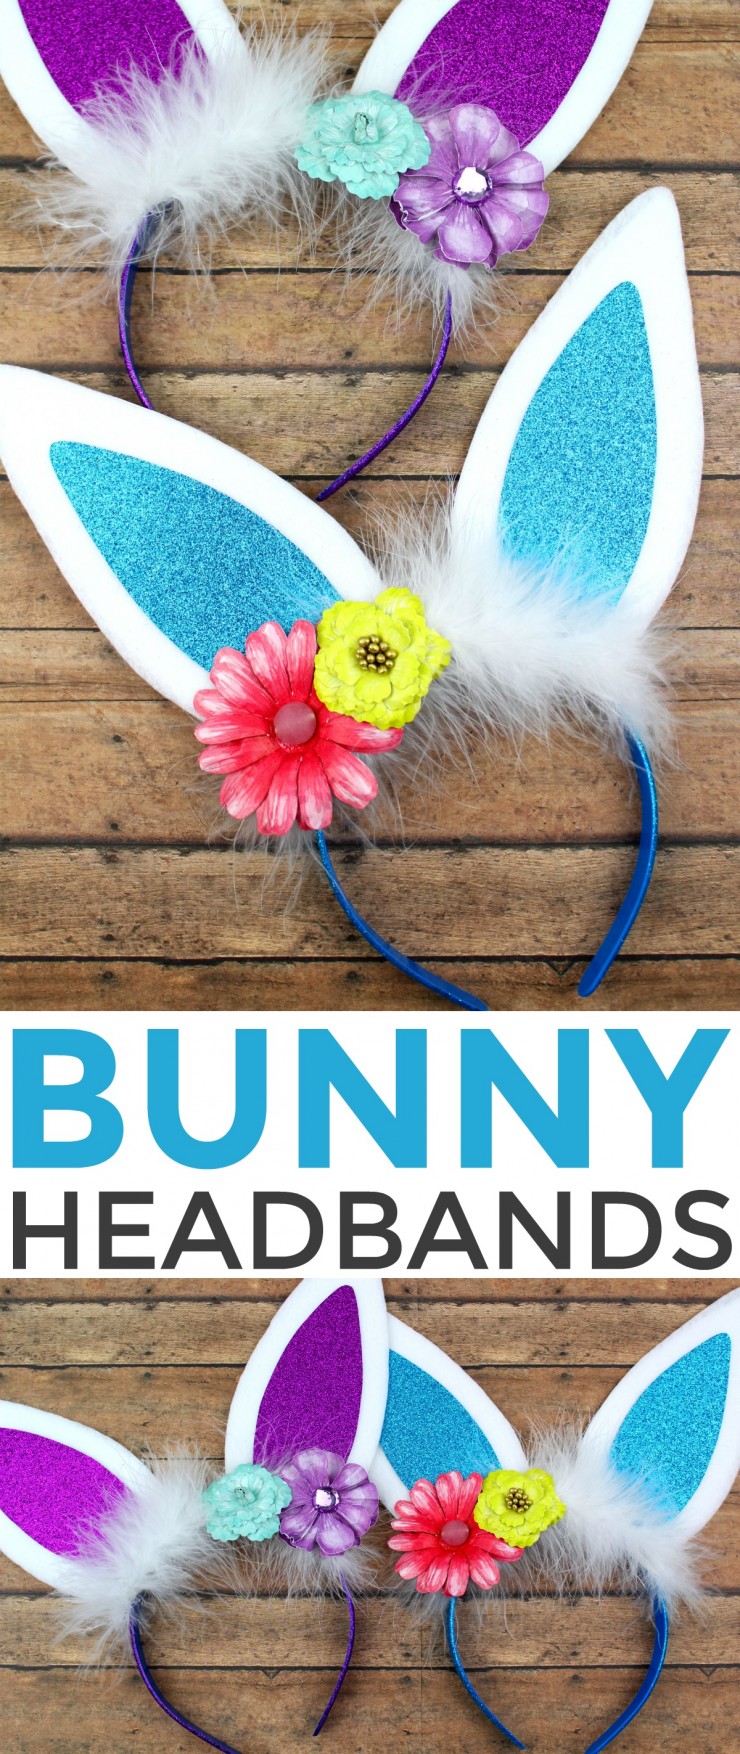 These adorable bunny headbands are an easy diy project that results in a pretty headband perfect for Easter and everyday wear!